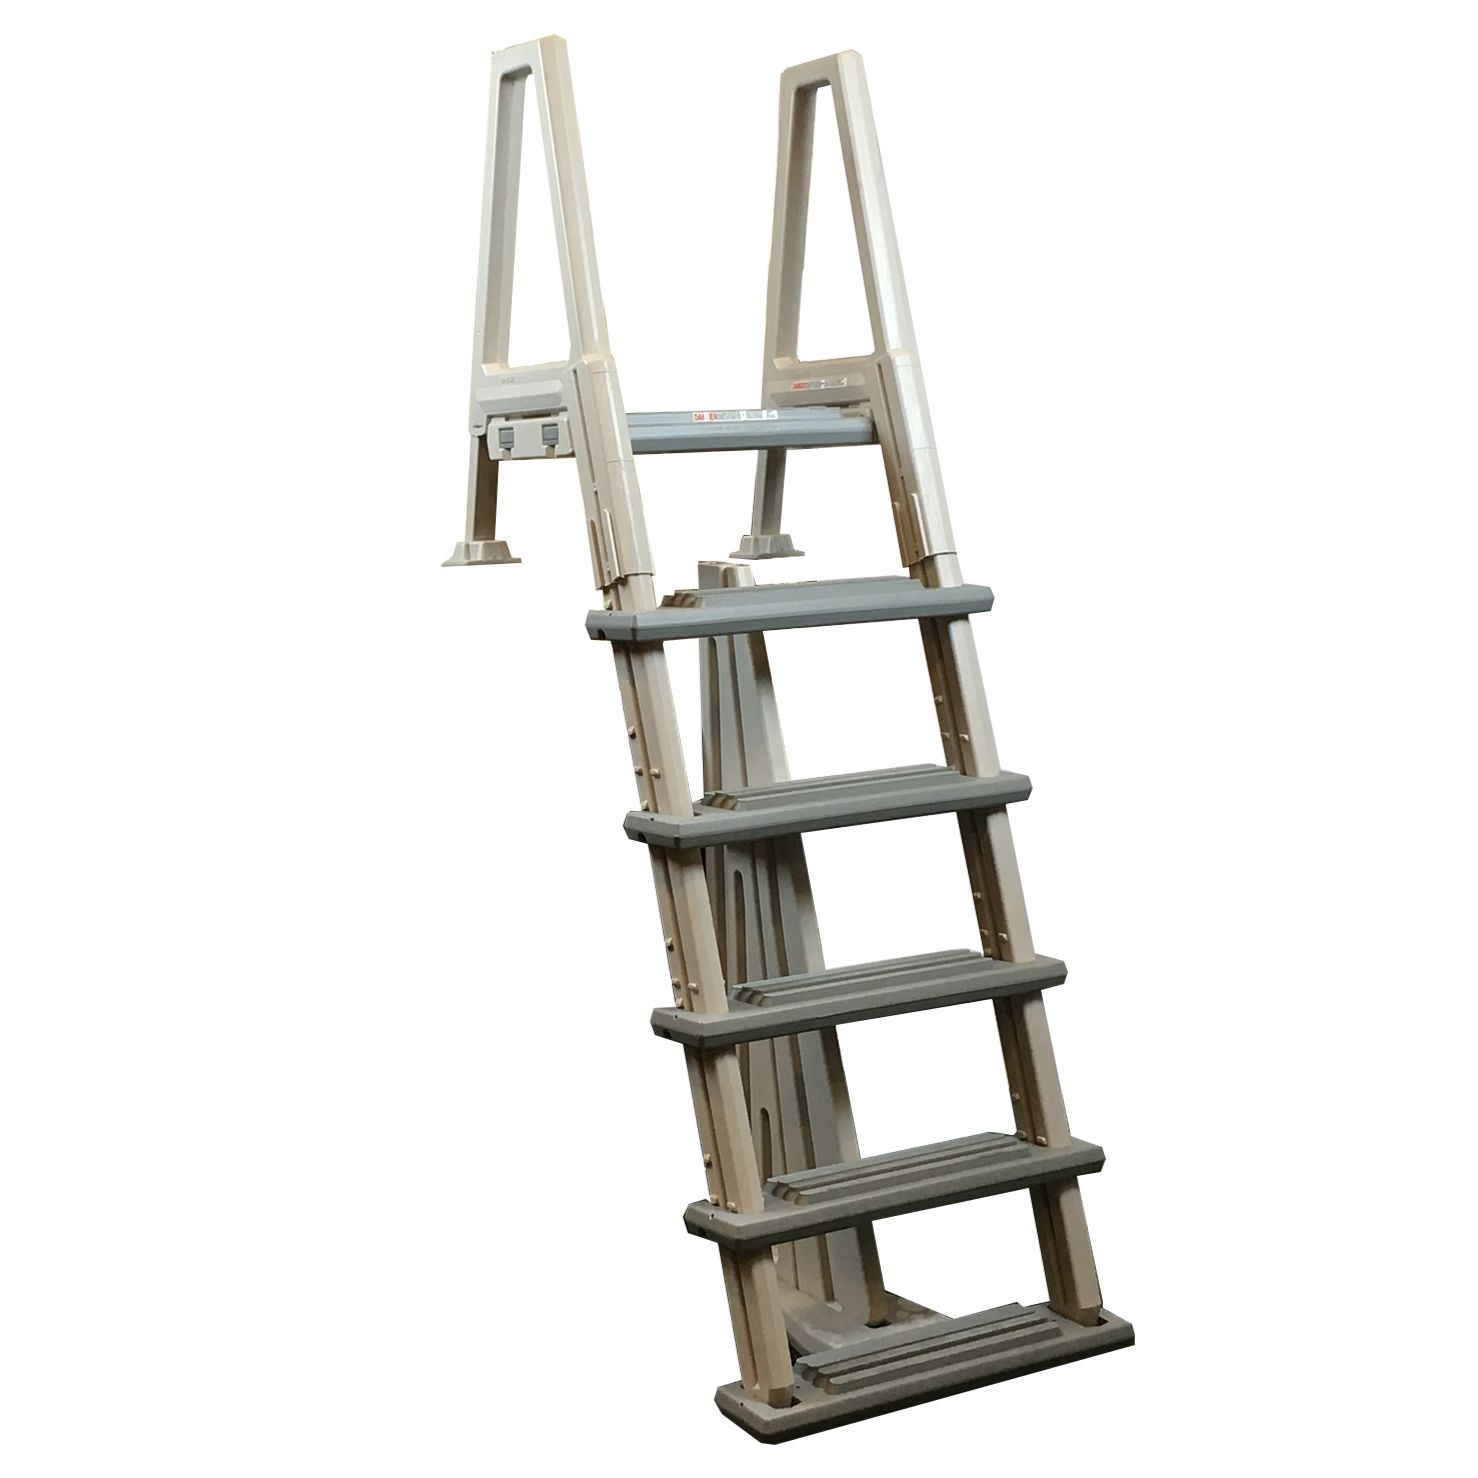 J-Frame Heavy Duty Ladder for Above Ground Pools